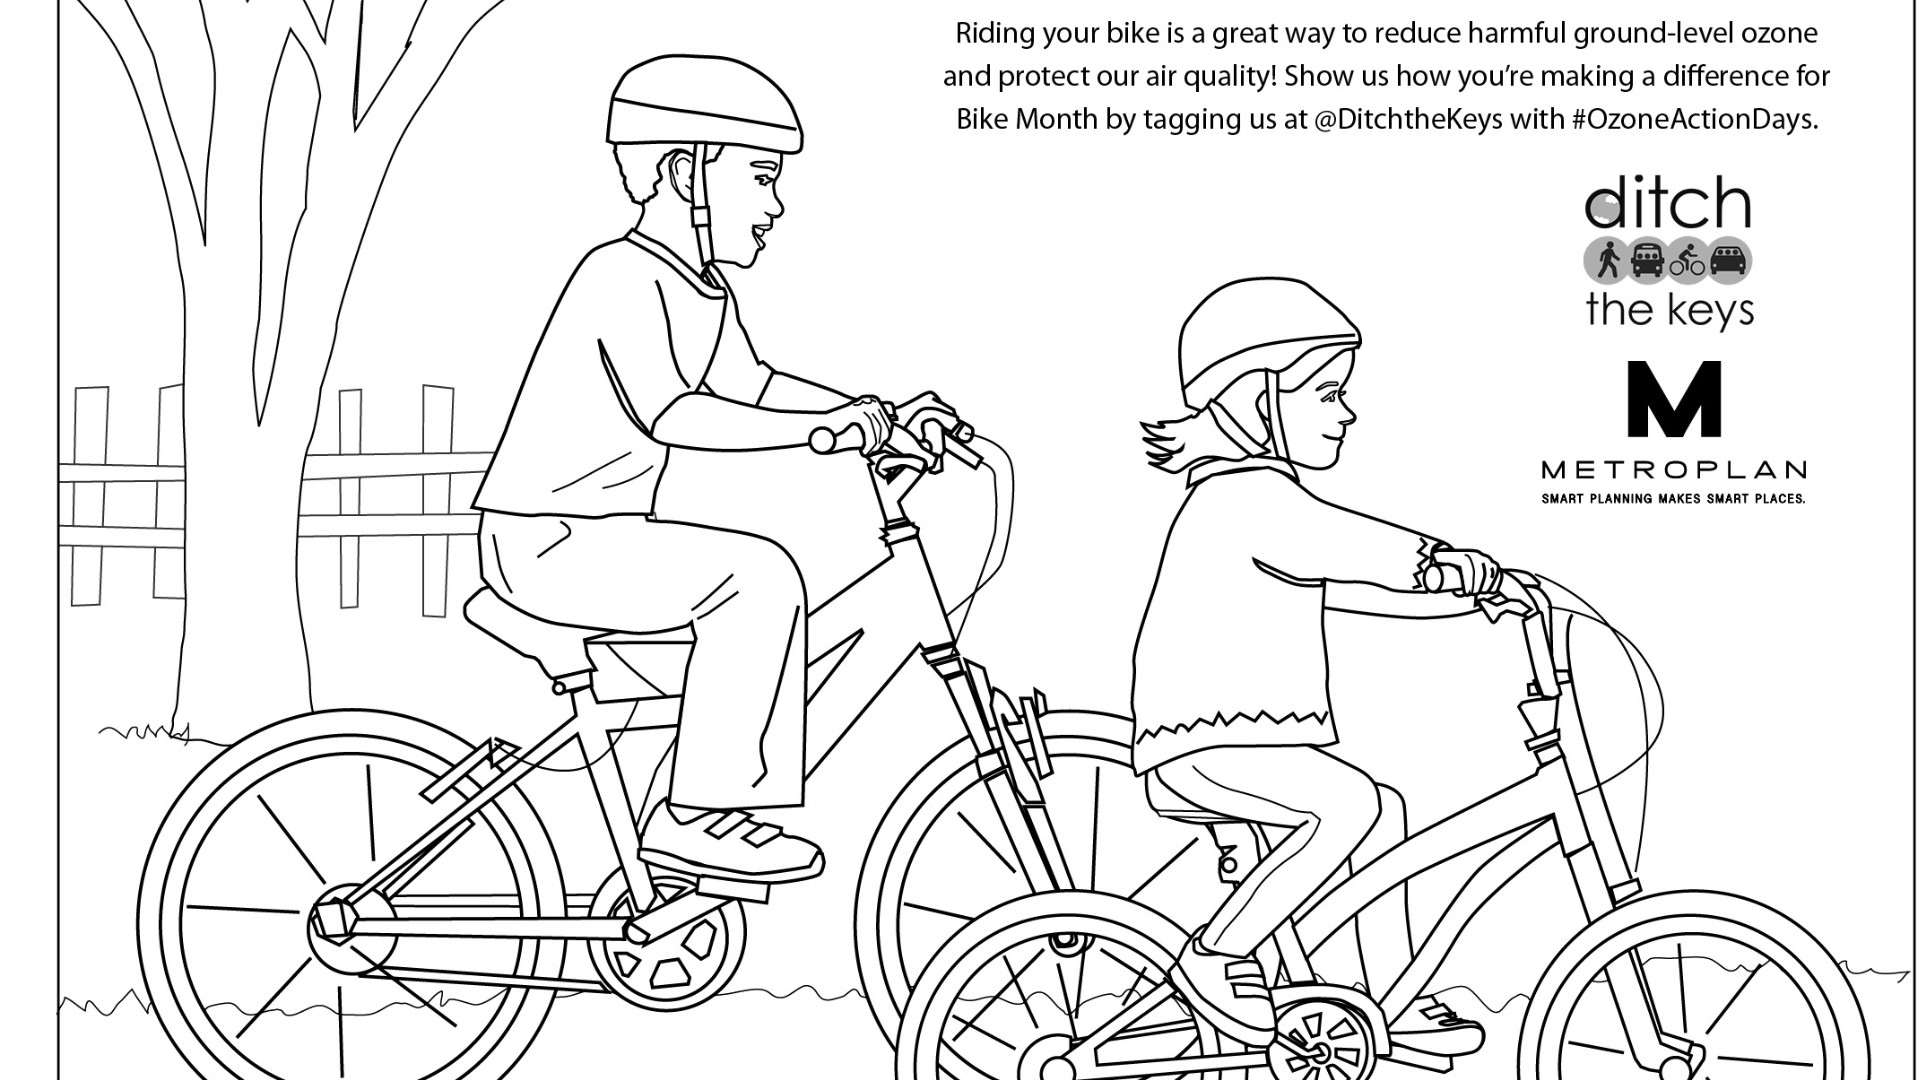 Create your own artwork or decorate these coloring sheets and then hang it up in your window so families walking or biking by can spot them.